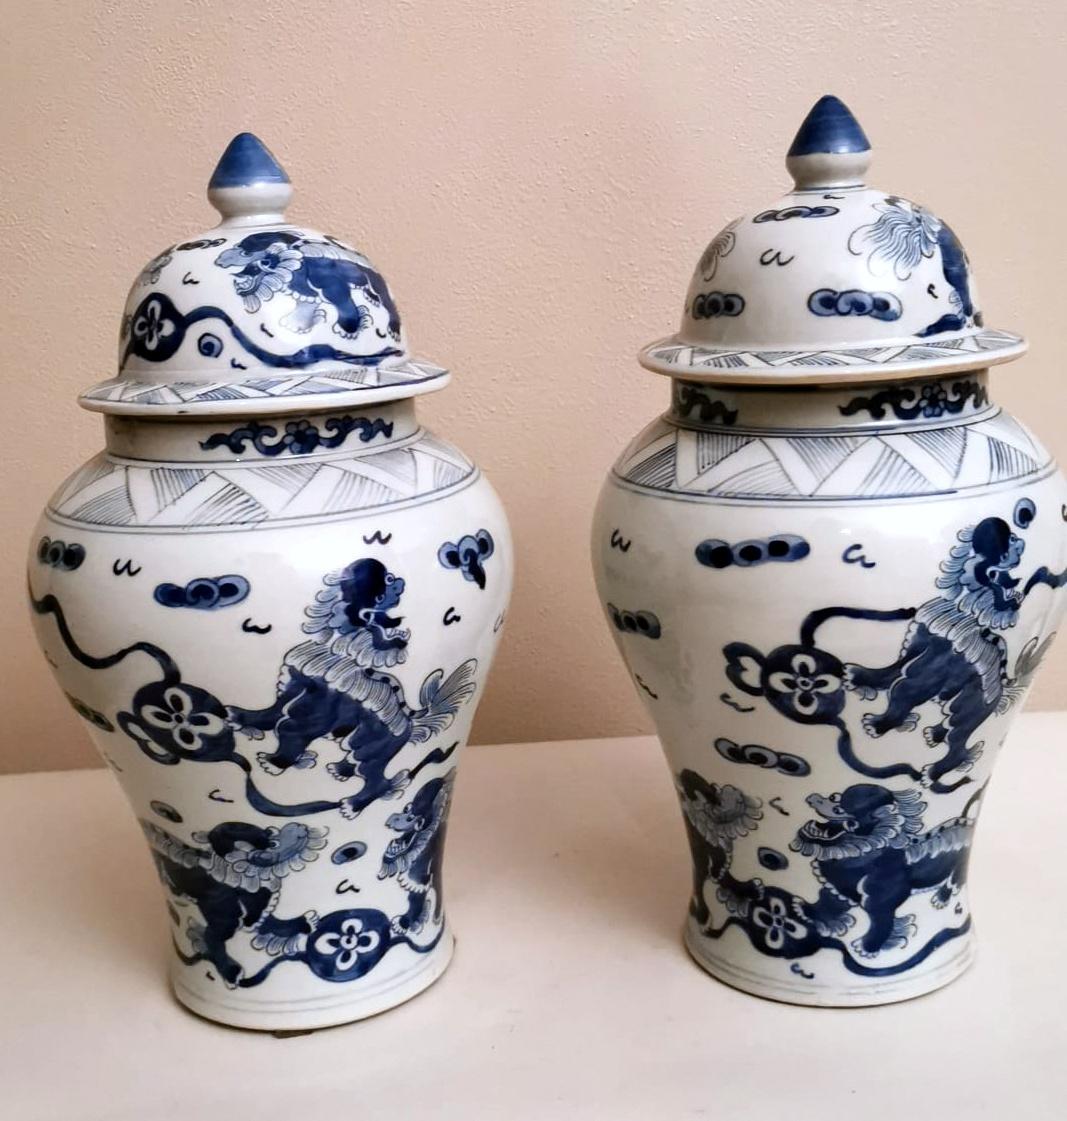 We kindly suggest you read the whole description, because with it we try to give you detailed technical and historical information to guarantee the authenticity of our objects.
The pair consists of two vases with a classic rounded shape; they are